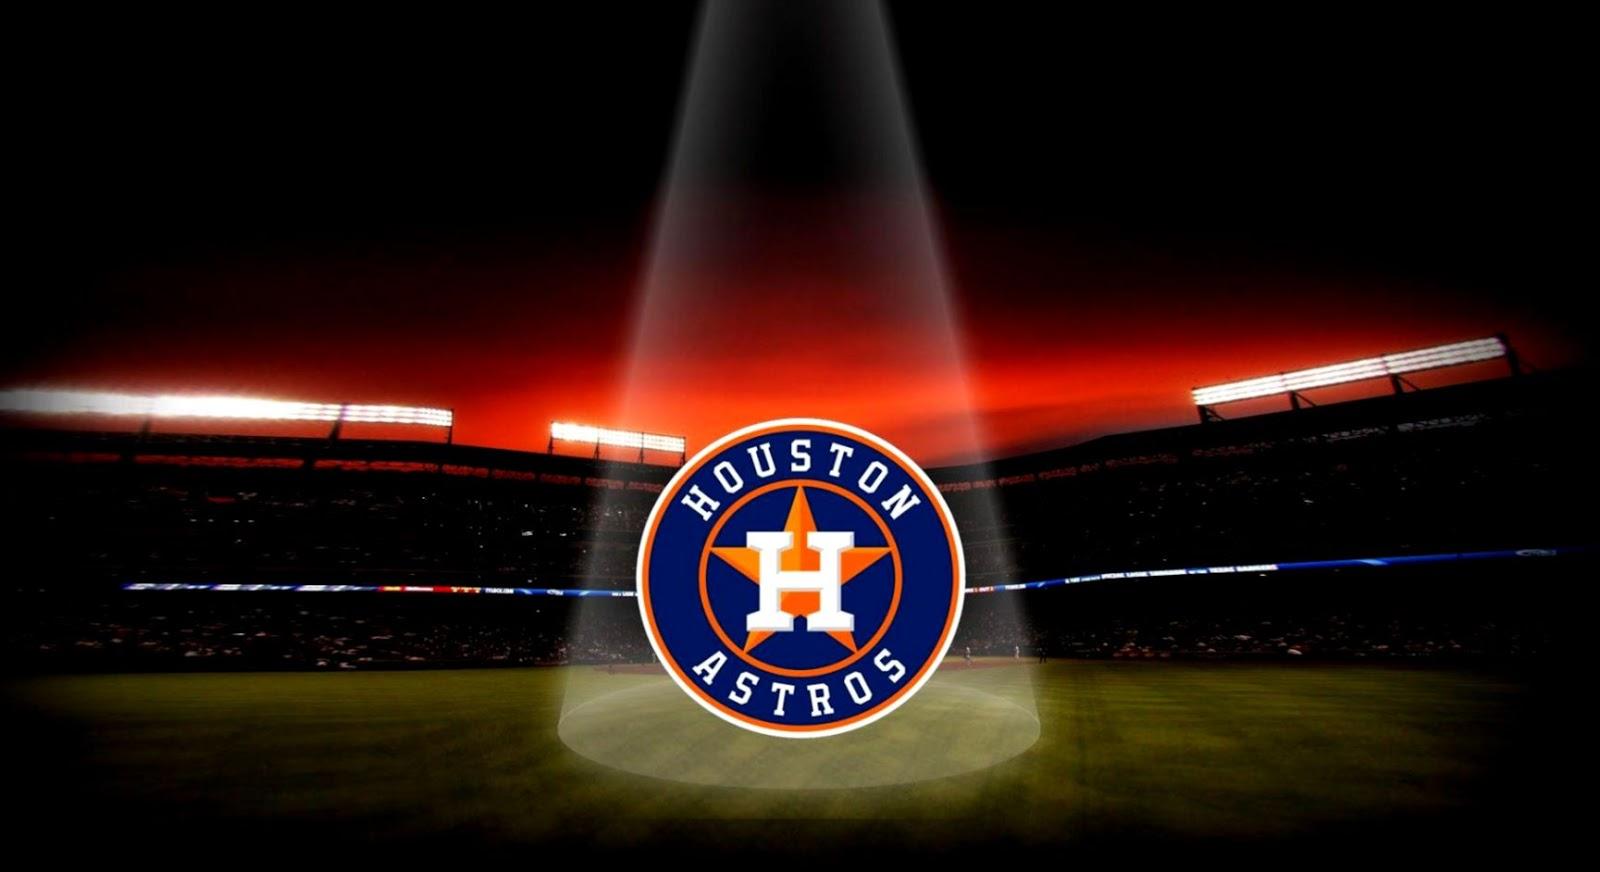 Houston Astros 2019 Wallpapers - Wallpaper Cave